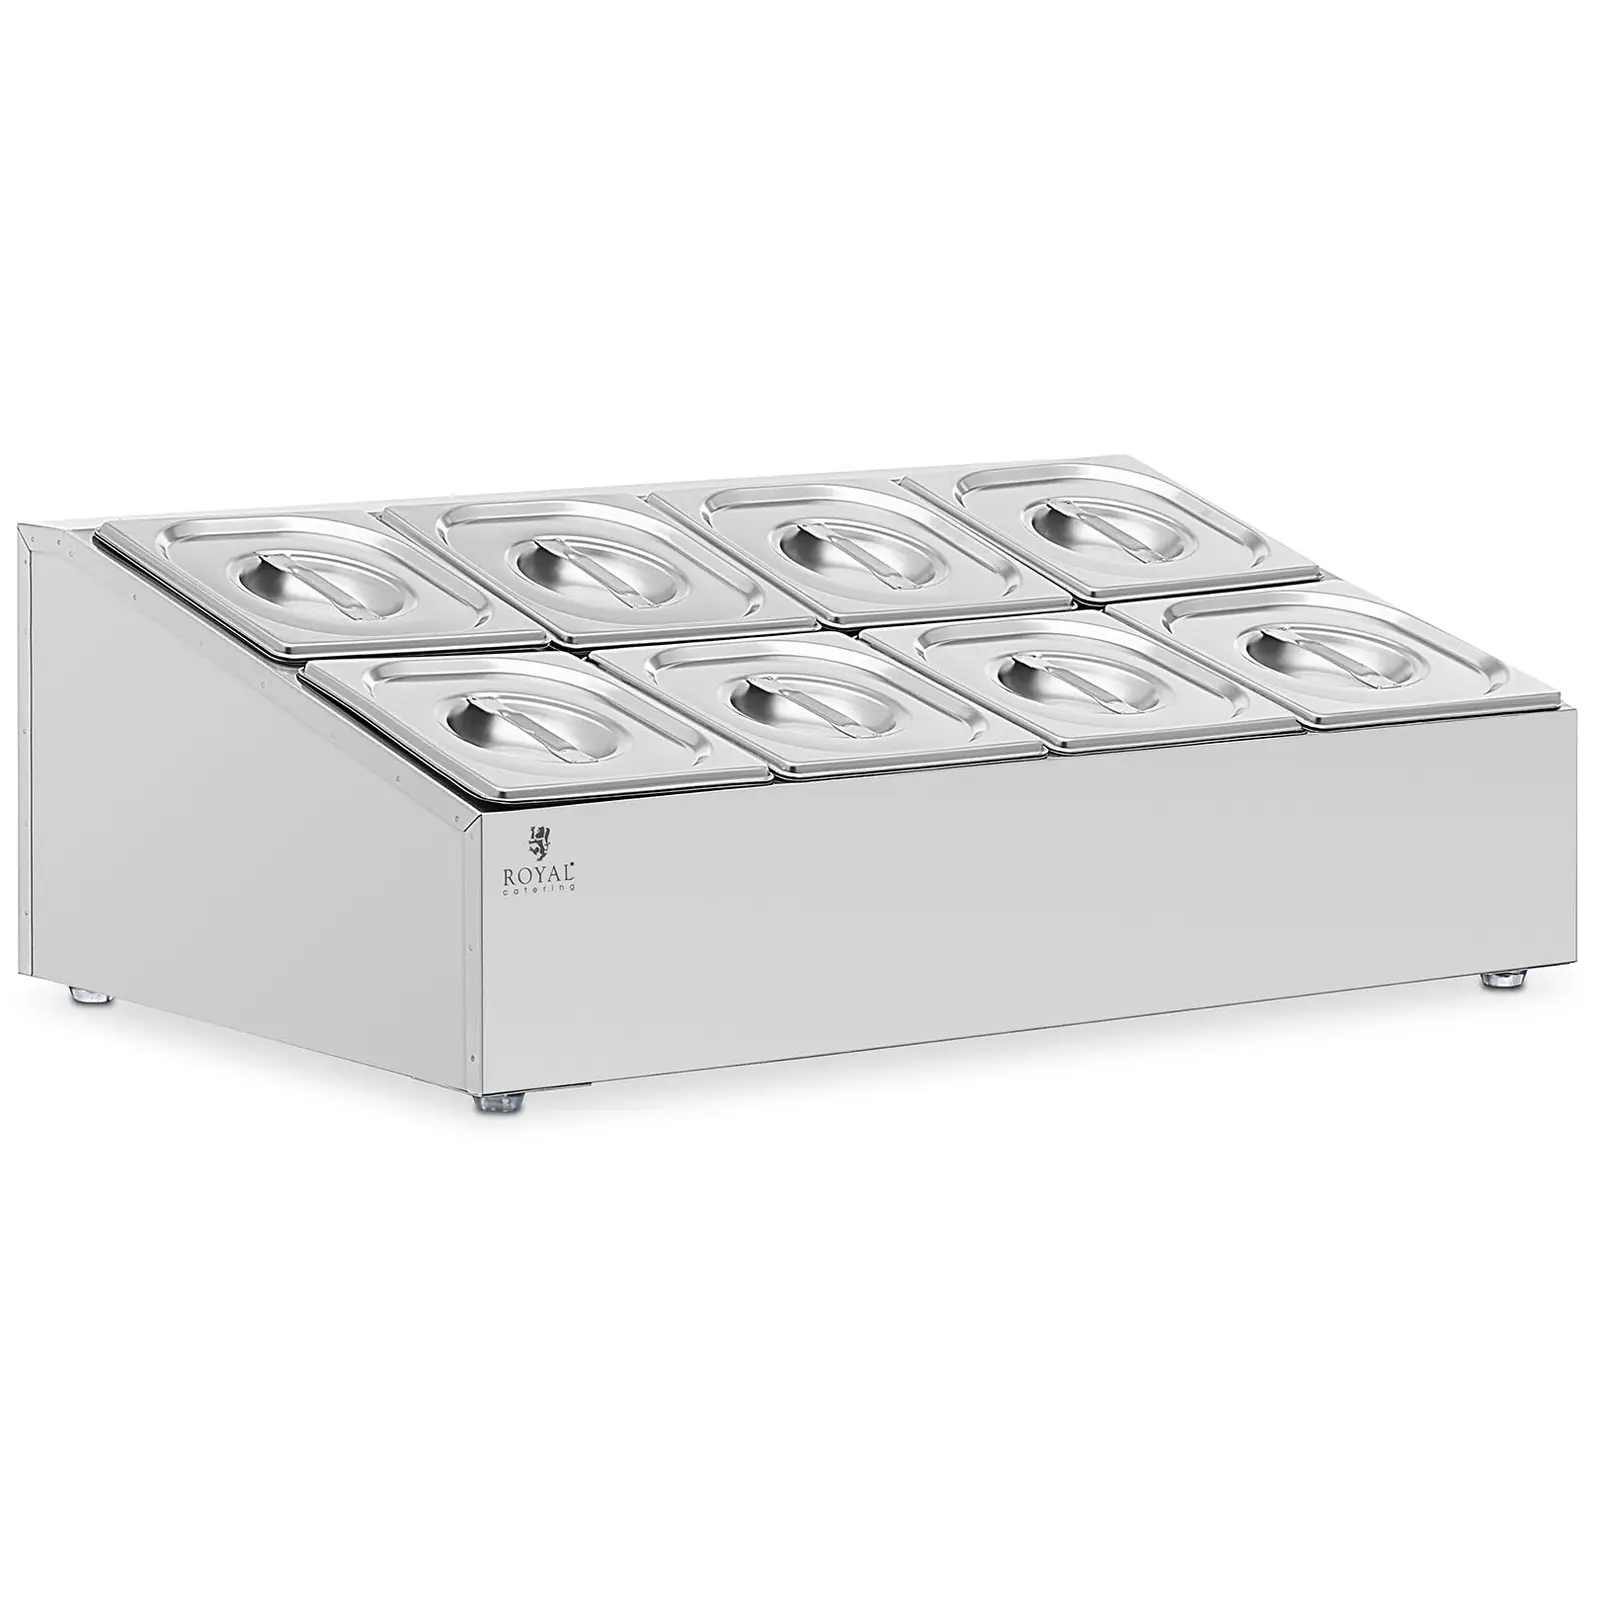 Vandens vonia („Bain-marie“) - 2 x 4 GN 1/6 - 15.2 l - „Royal Catering“